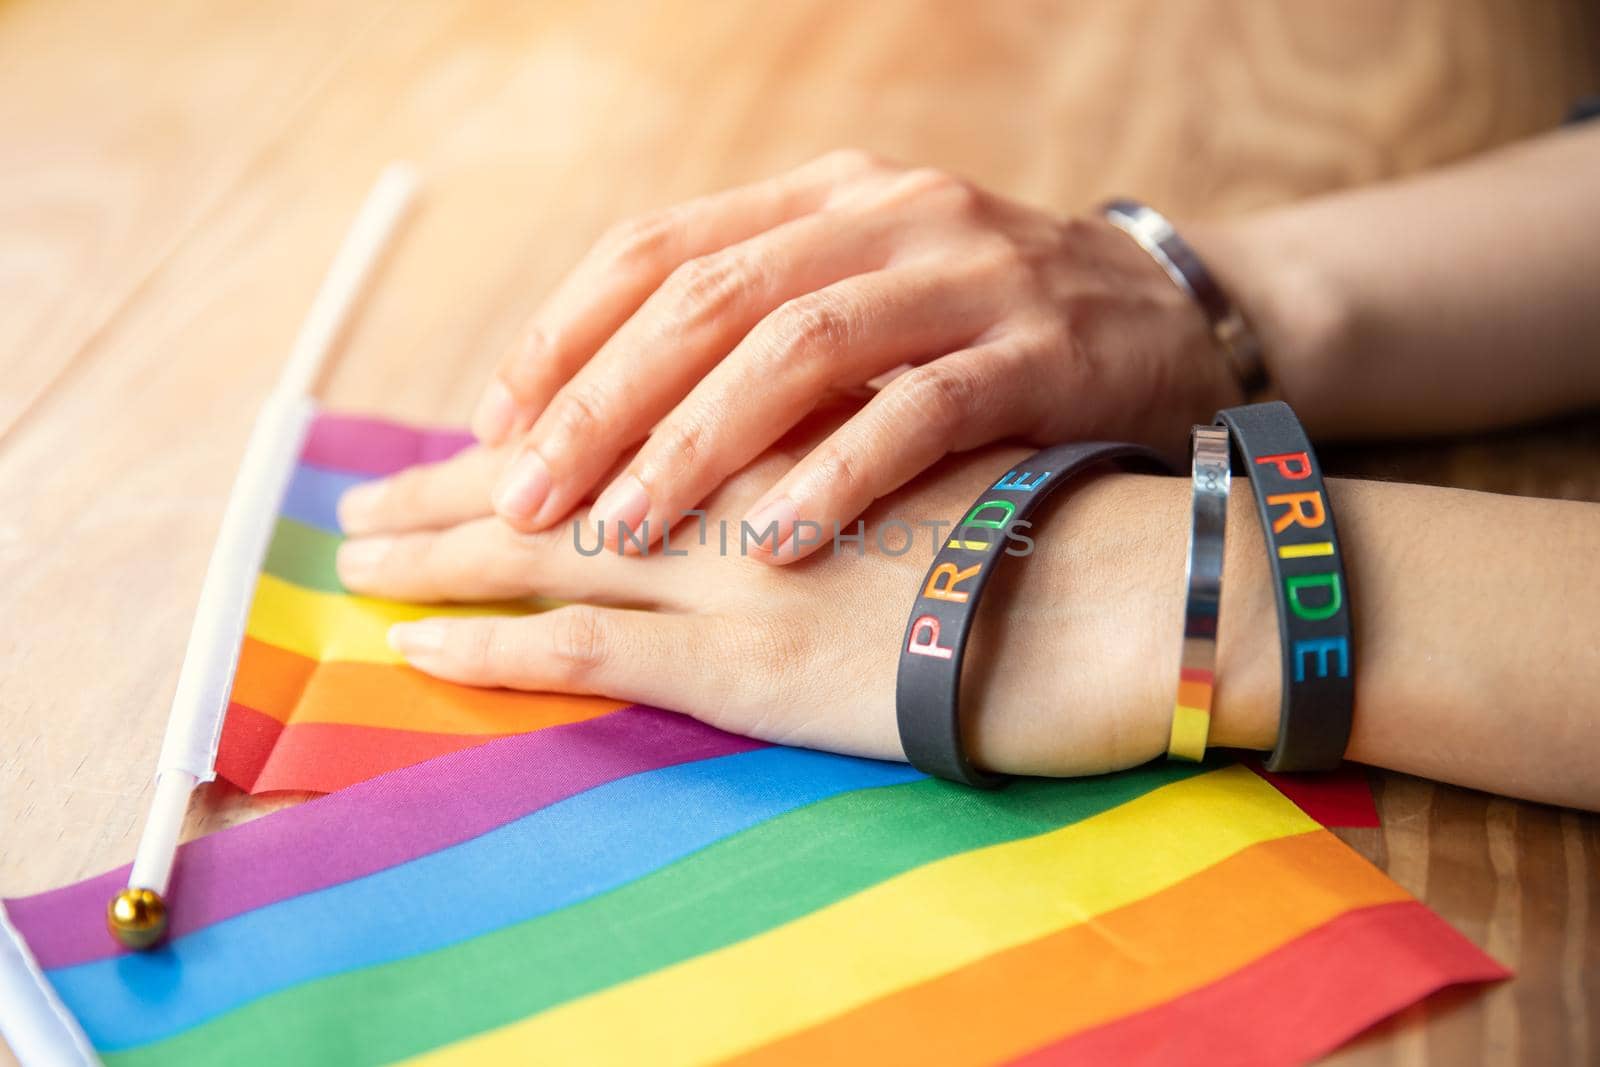 Transgender people hand together with LGBT rainbow flag for sexuality rights campaign symbol by qualitystocks